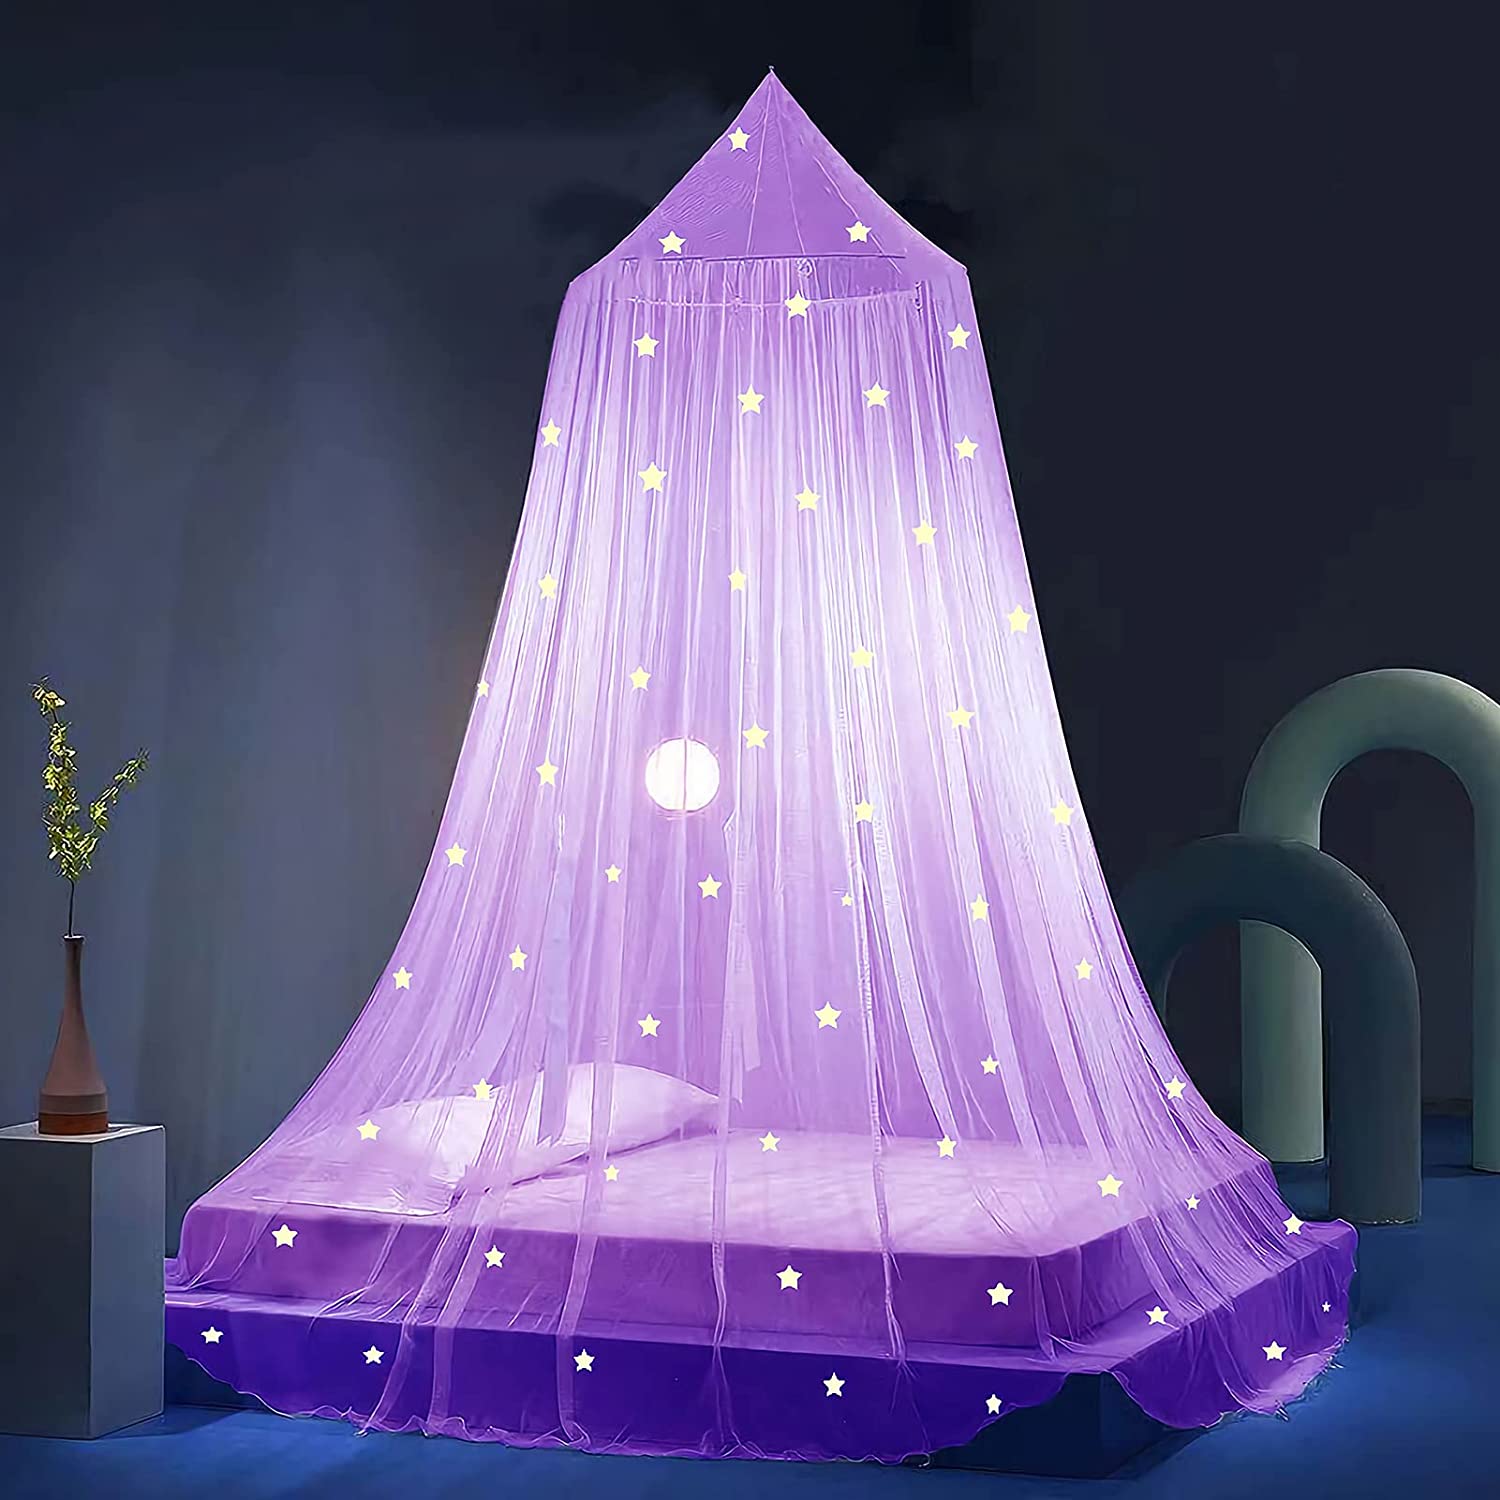 5. EIMILALY's Bed Canopy Glow in The Dark